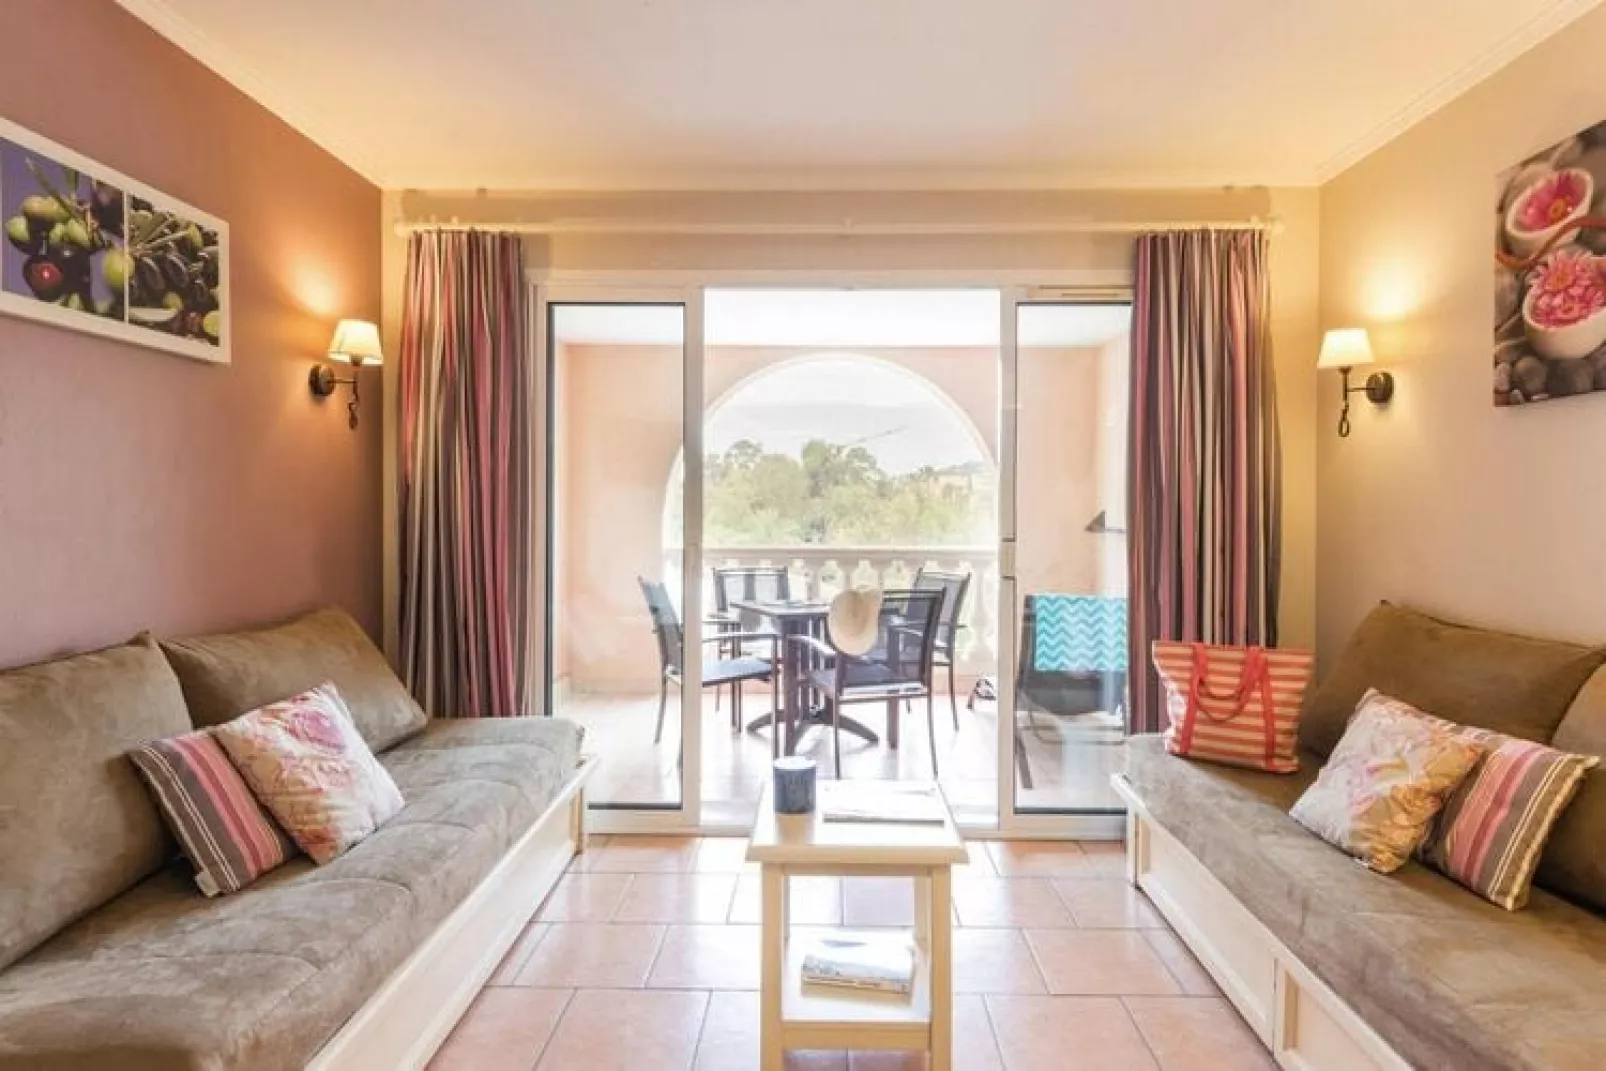 Residence Les Calanques, Les Issambres-24 Standard - Apt. 4 p. - 1 bedroom-Woonkamer